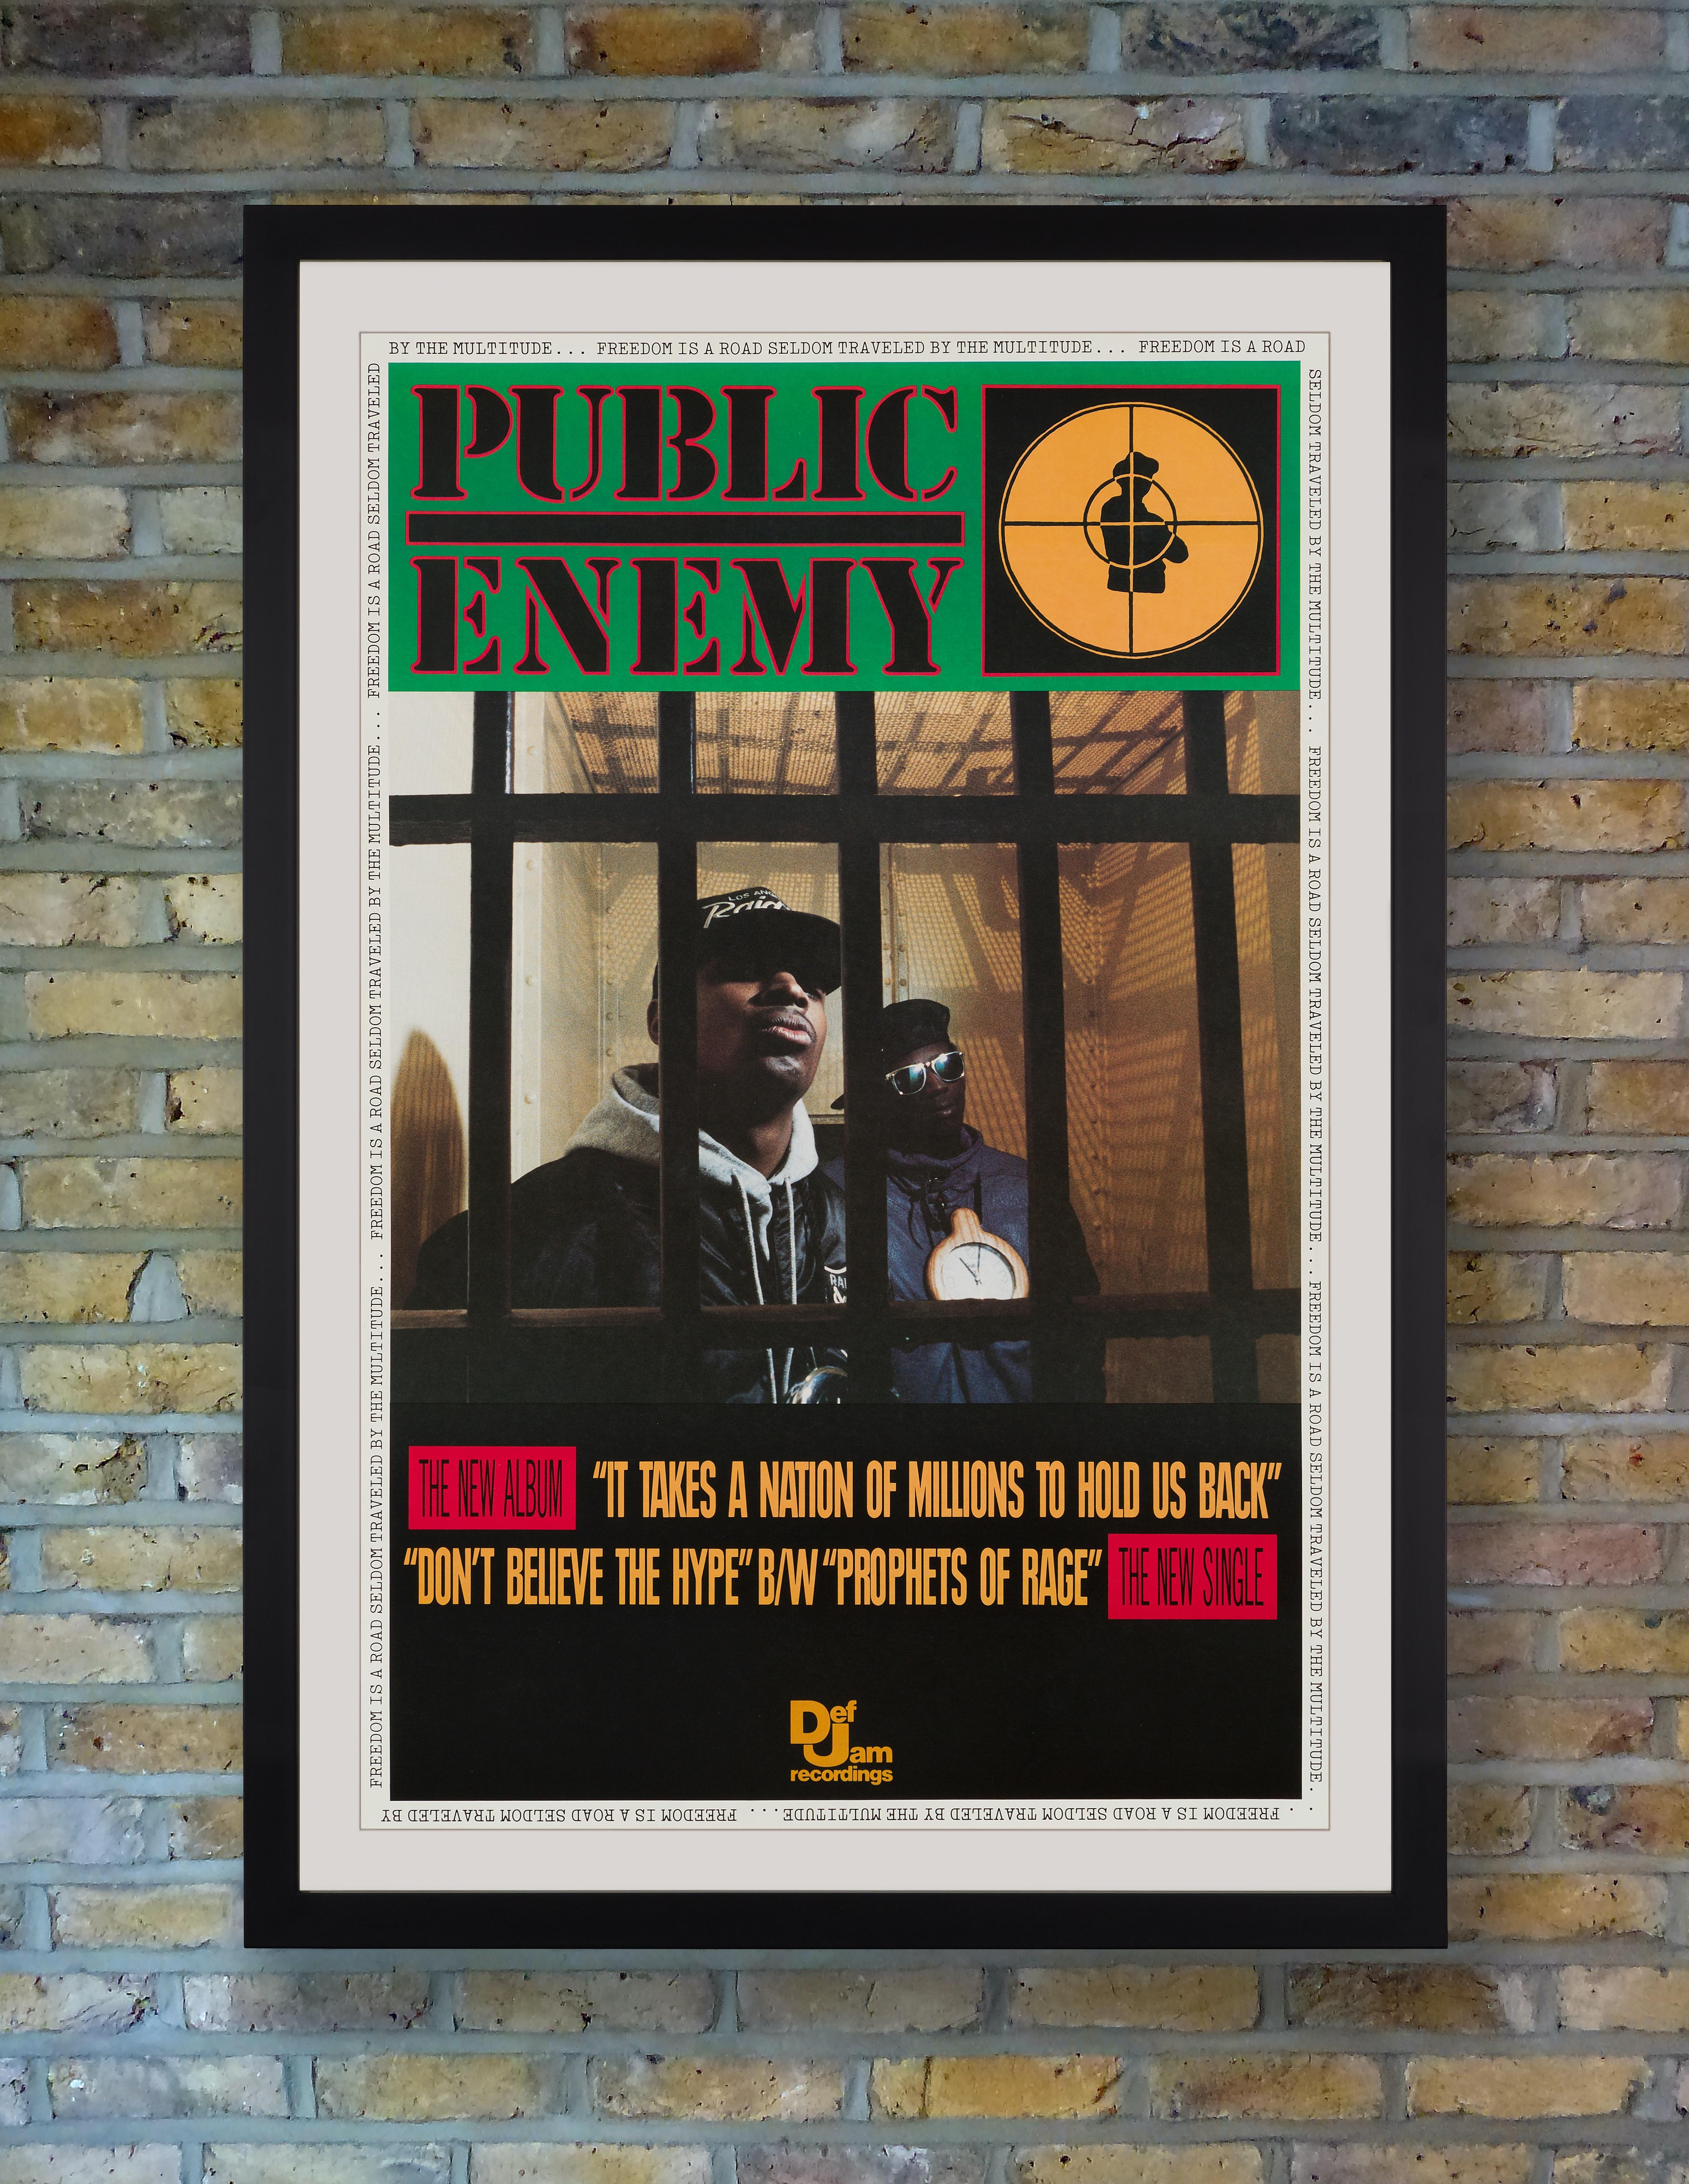 Prolific American hip-hop group Public Enemy's Chuck D and Flavor Flav appear behind bars in a photograph by Glen E. Friedman on this sought after original Def Jam promotional poster for the 1988 release of their seminal second album 'It Takes a